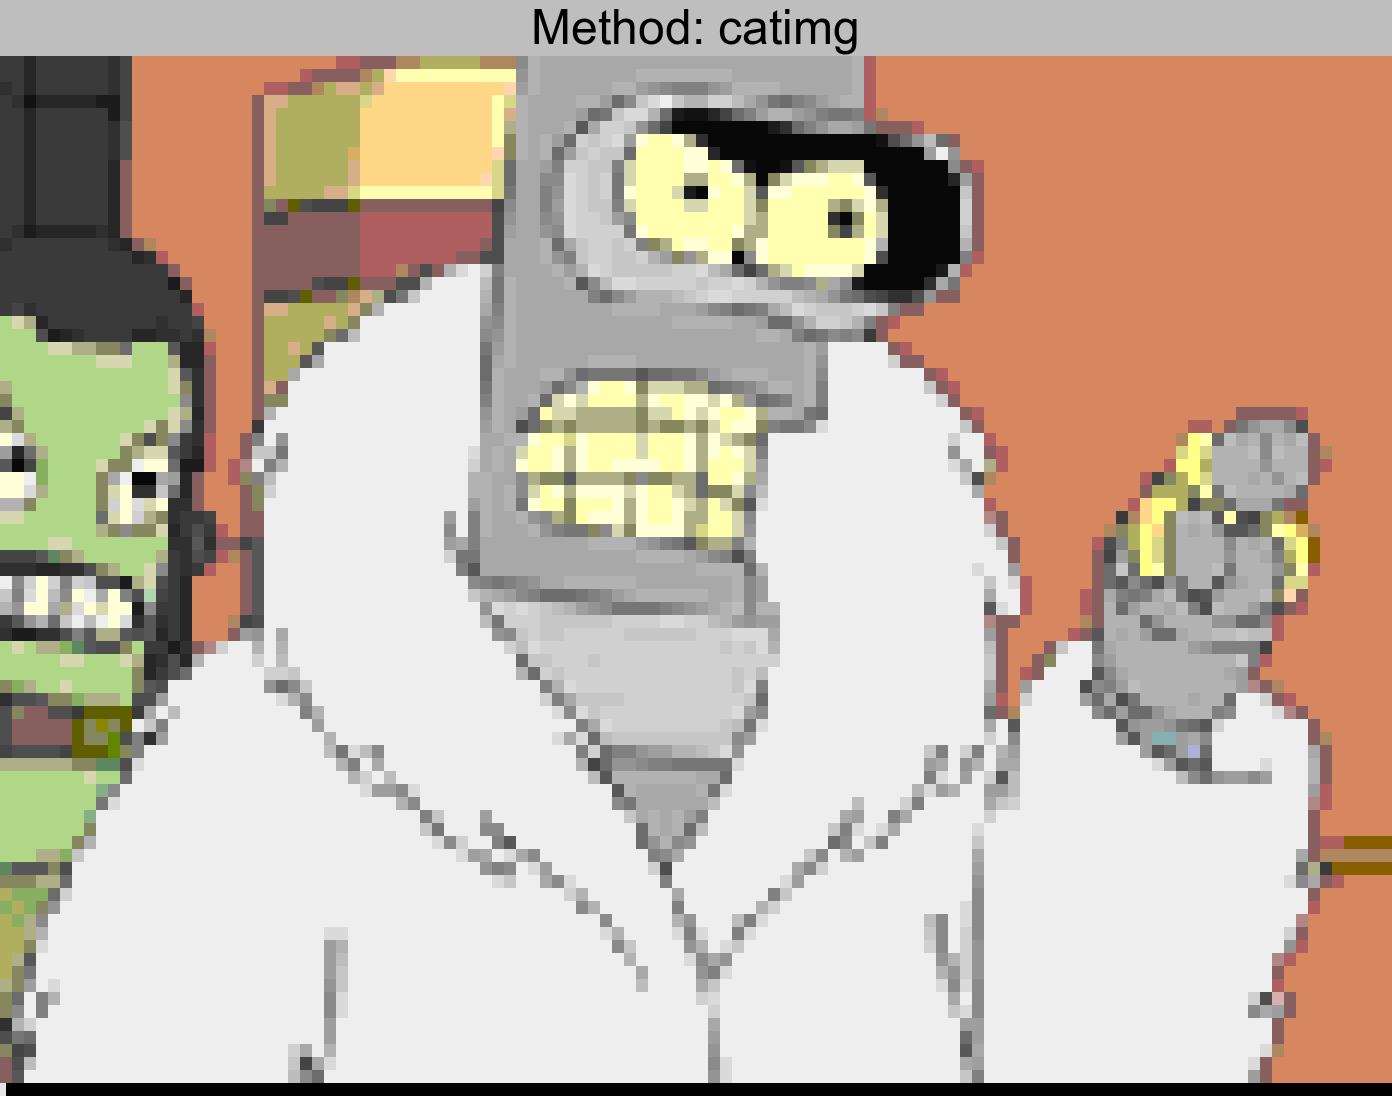 bender.png converted using catimg